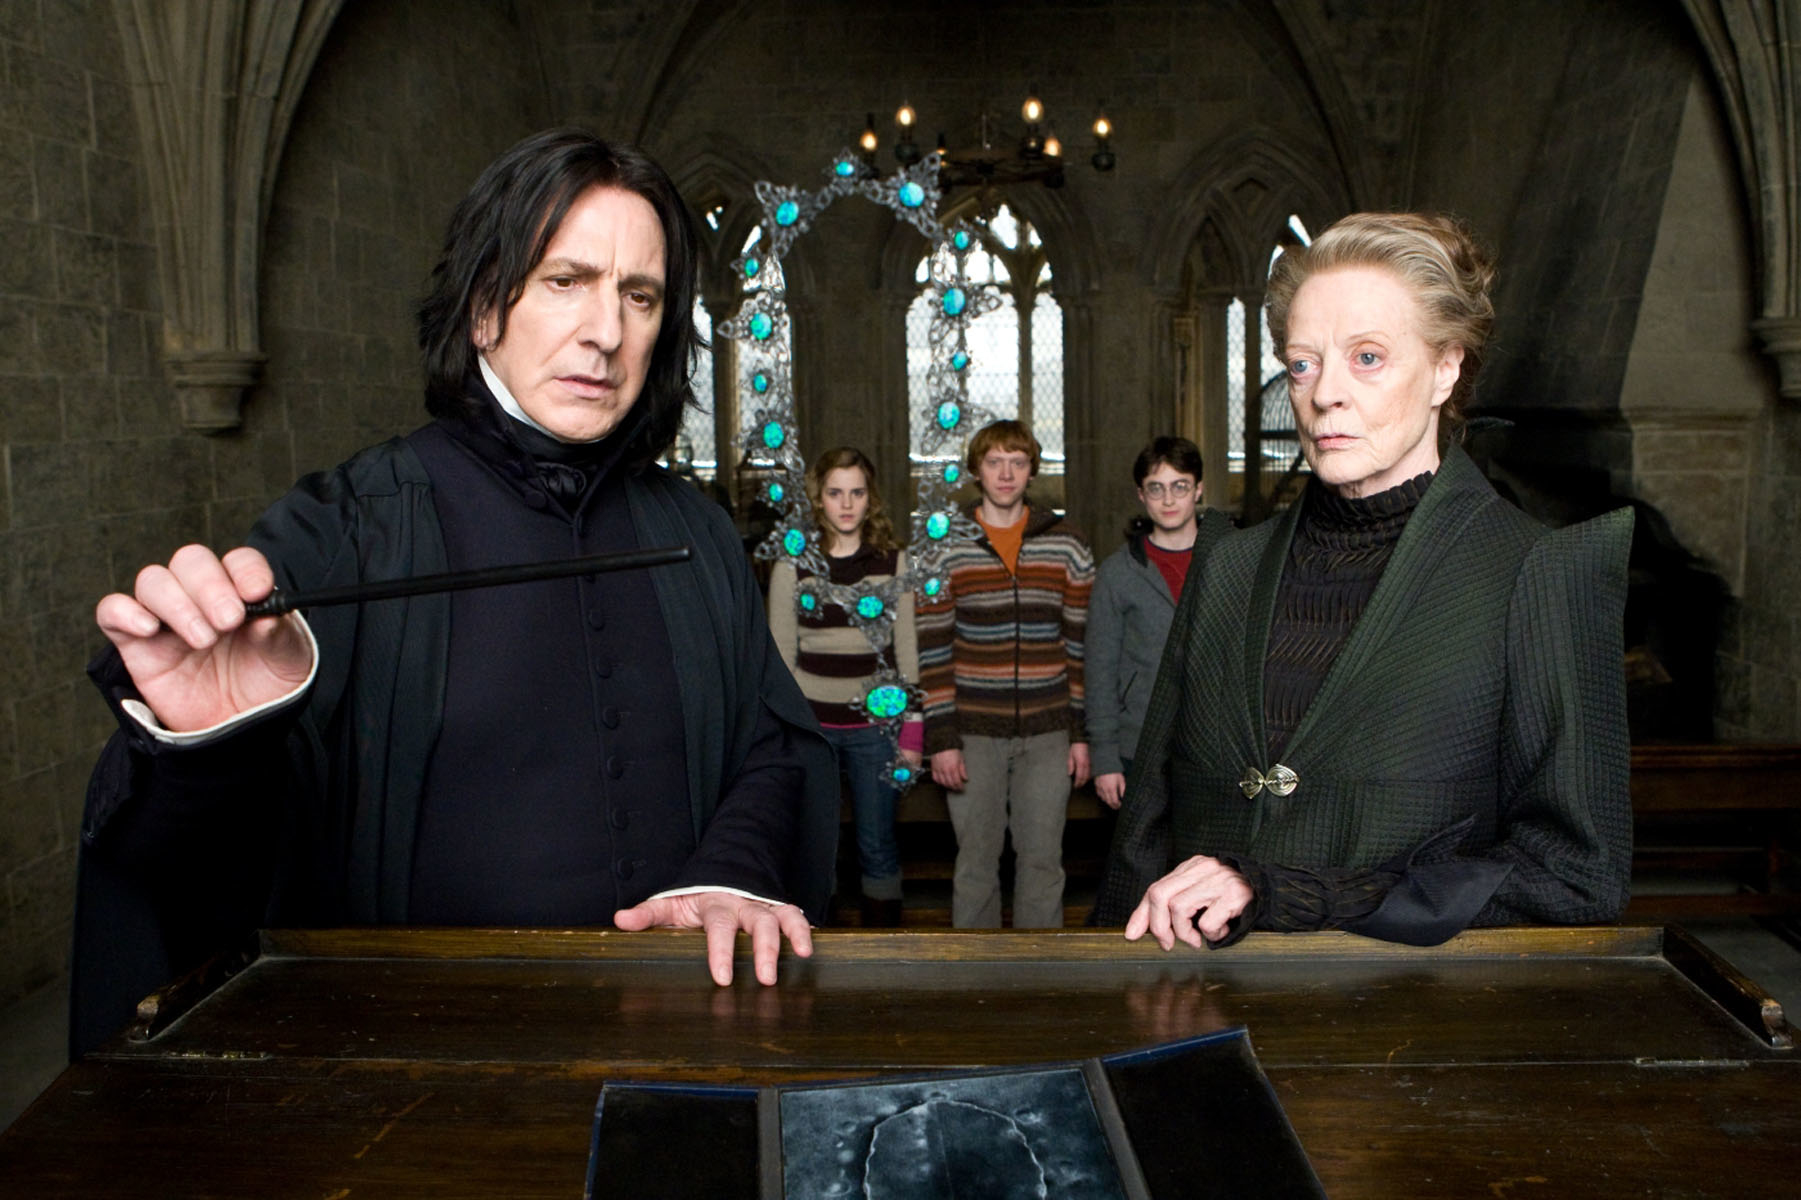 Severus Snape and Minerva McGonagall in Hogwarts attire standing, three students behind them looking serious